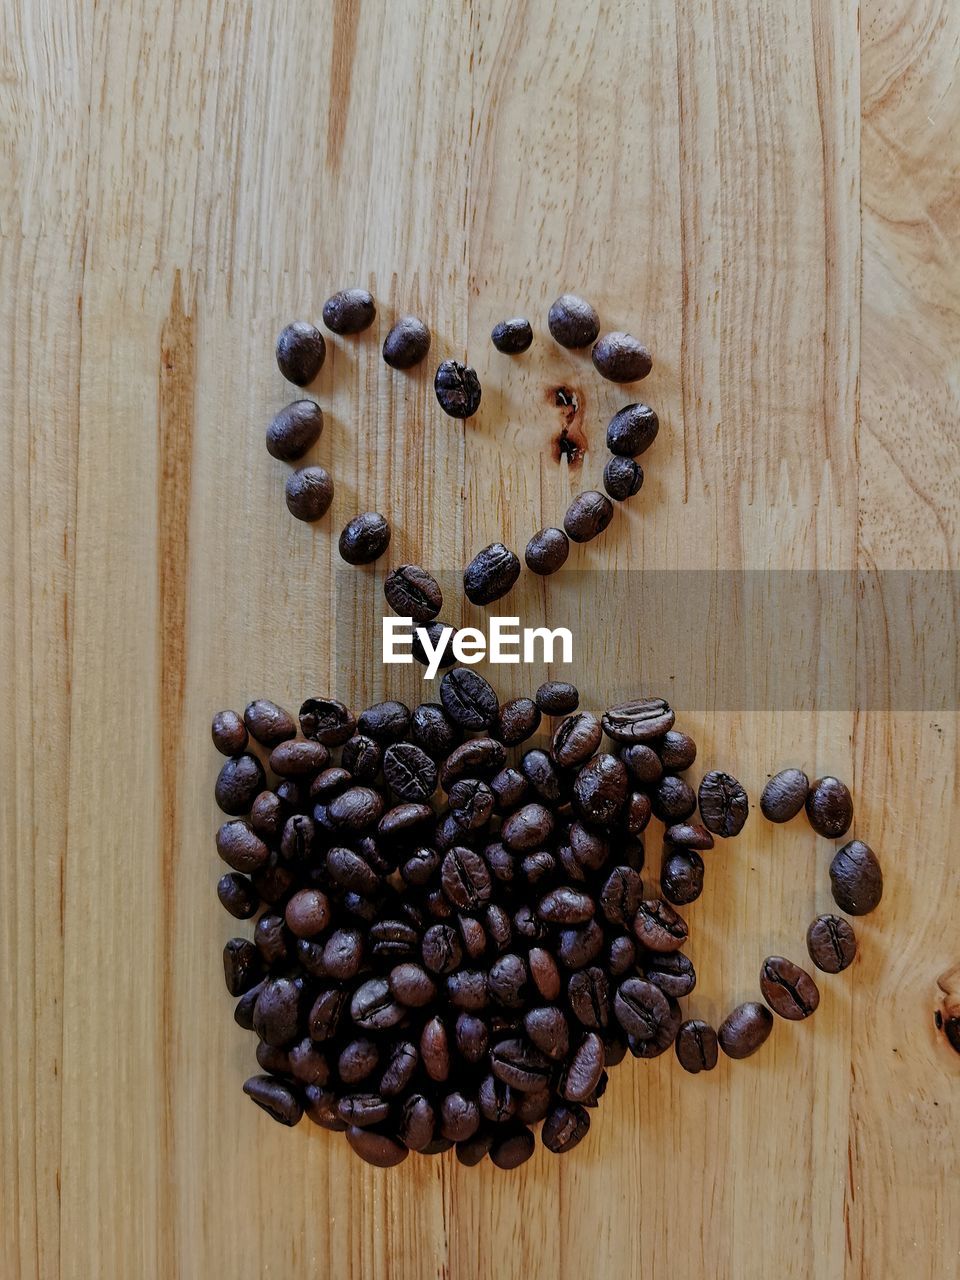 HIGH ANGLE VIEW OF COFFEE BEANS ON WOODEN TABLE